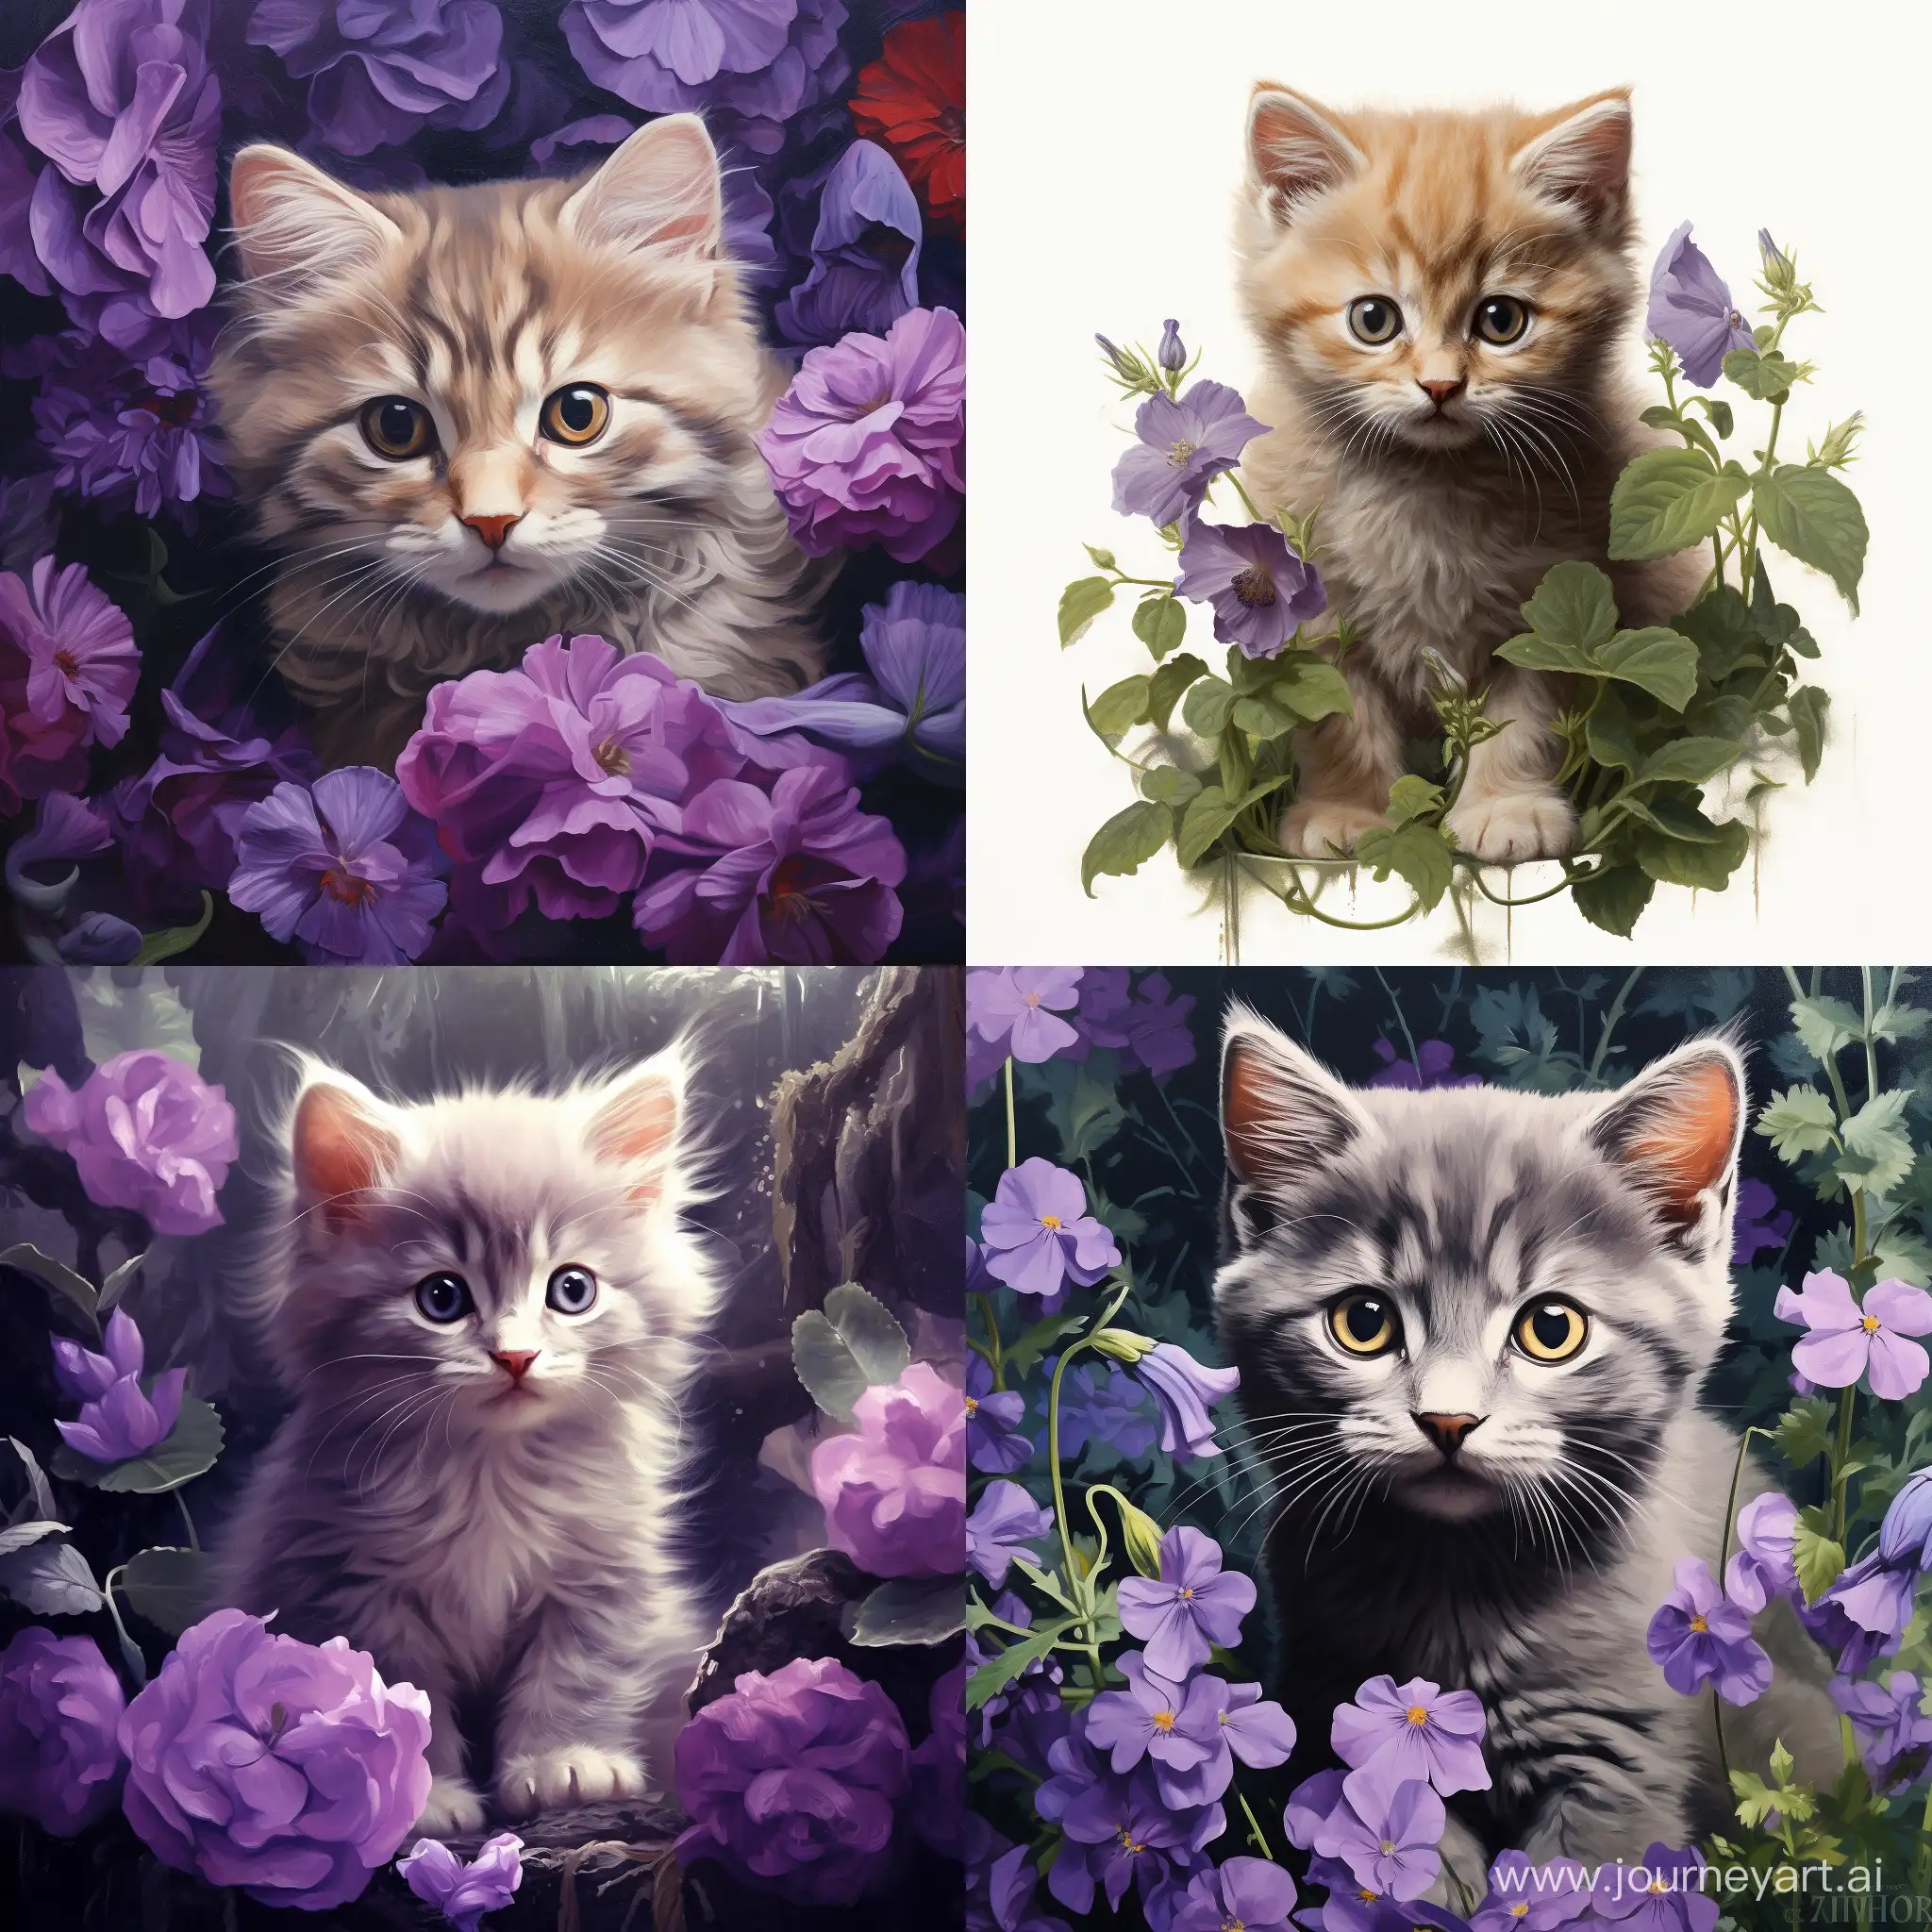 Adorable-Kitten-Surrounded-by-Violet-Flowers